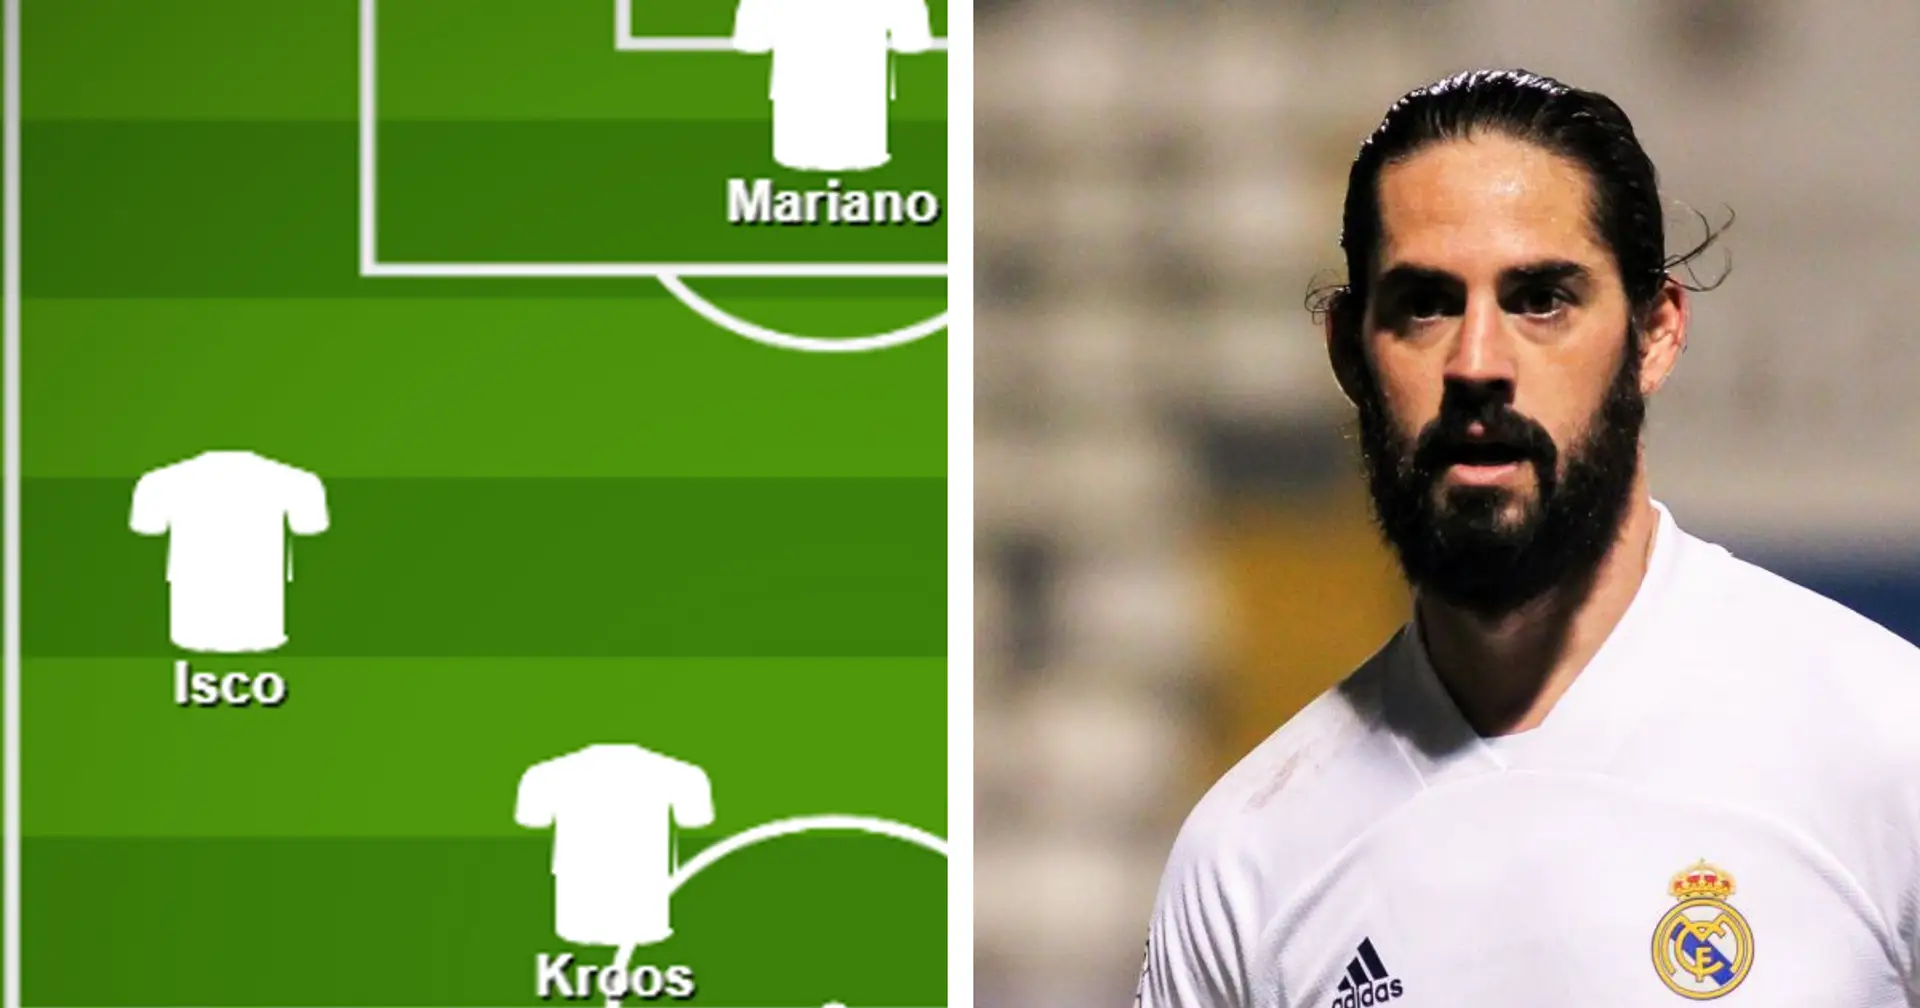 Asensio out, Isco in? Select your Madrid starting XI vs Atalanta from 2 options!